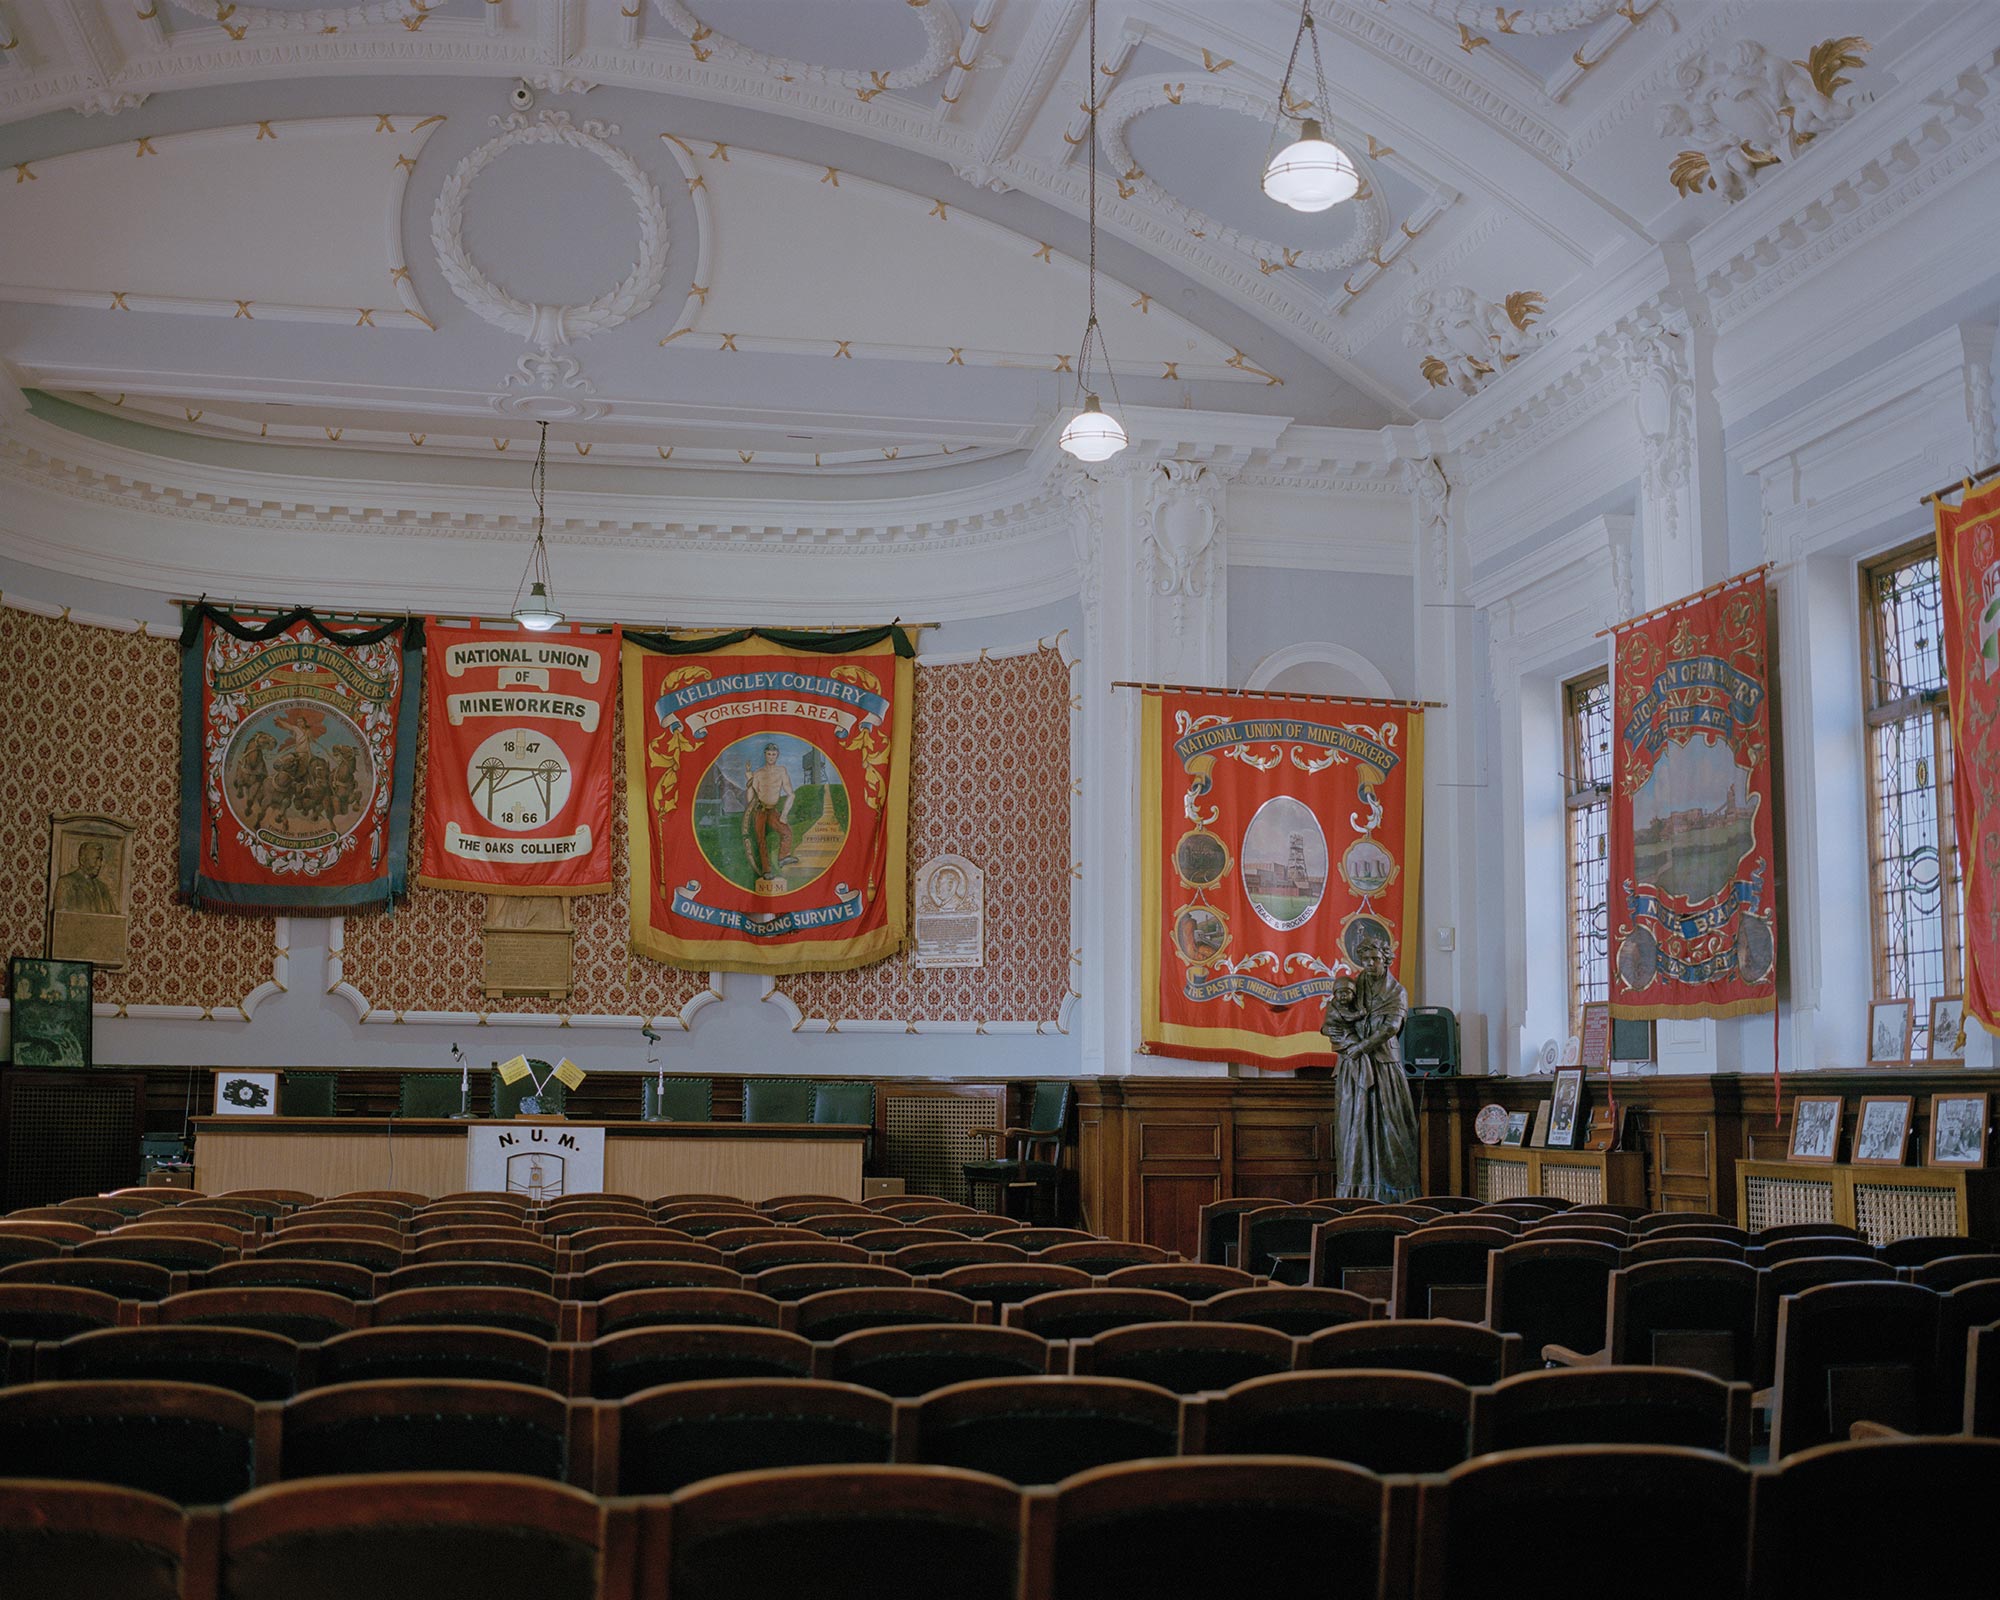 Area banners inside the National Union of Mineworkers headquarters, Barnsley, South Yorkshire.